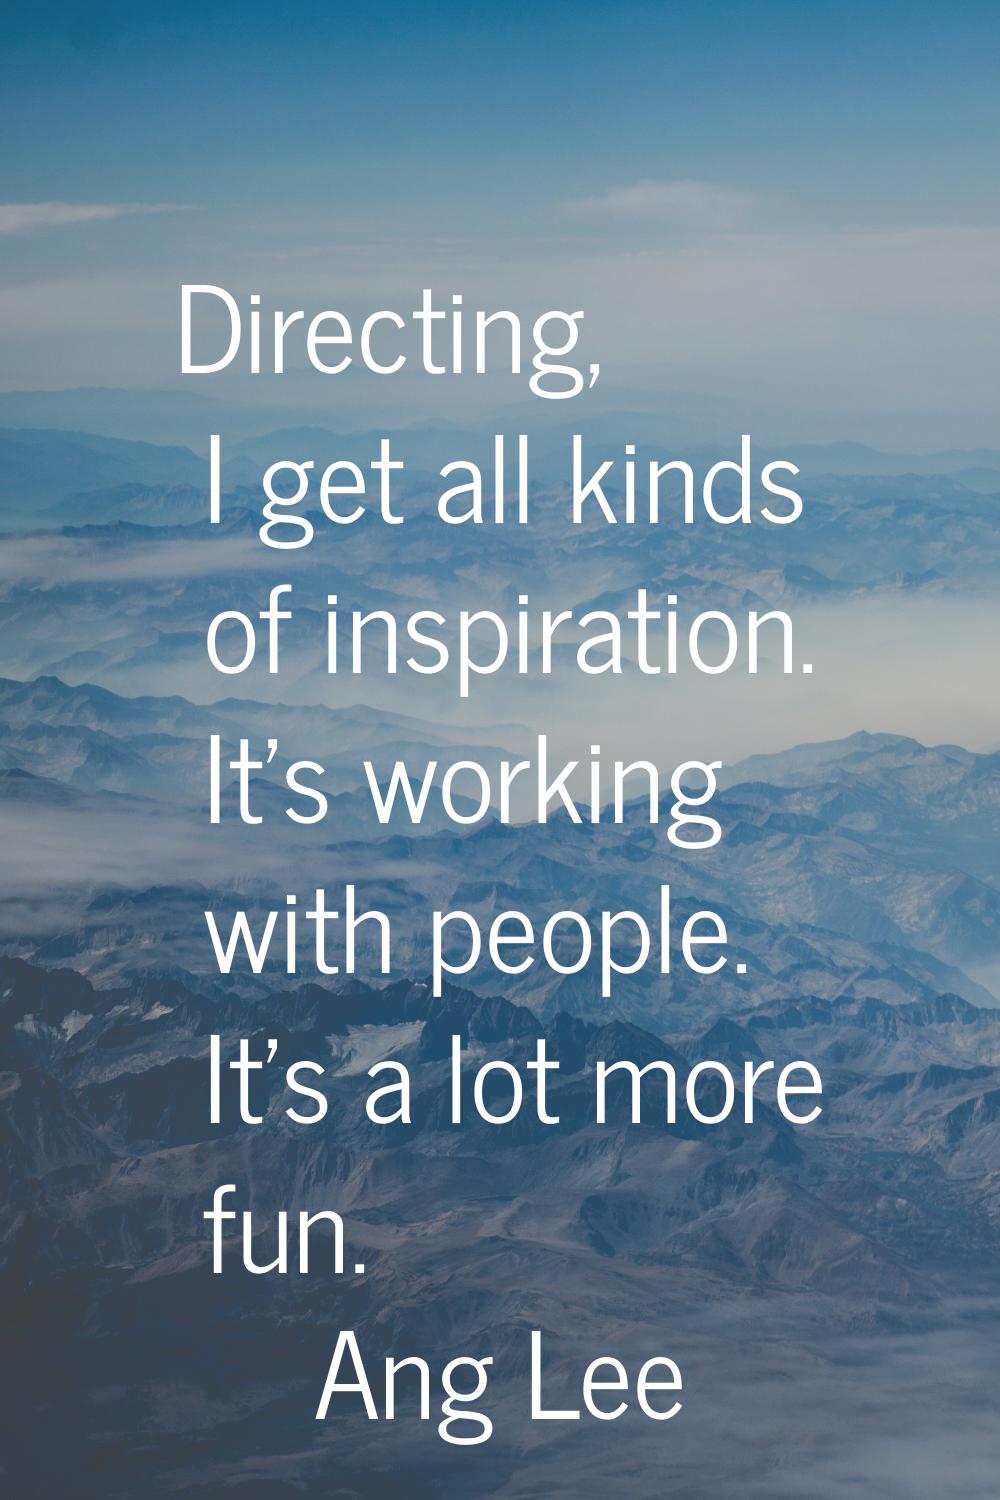 Directing, I get all kinds of inspiration. It's working with people. It's a lot more fun.